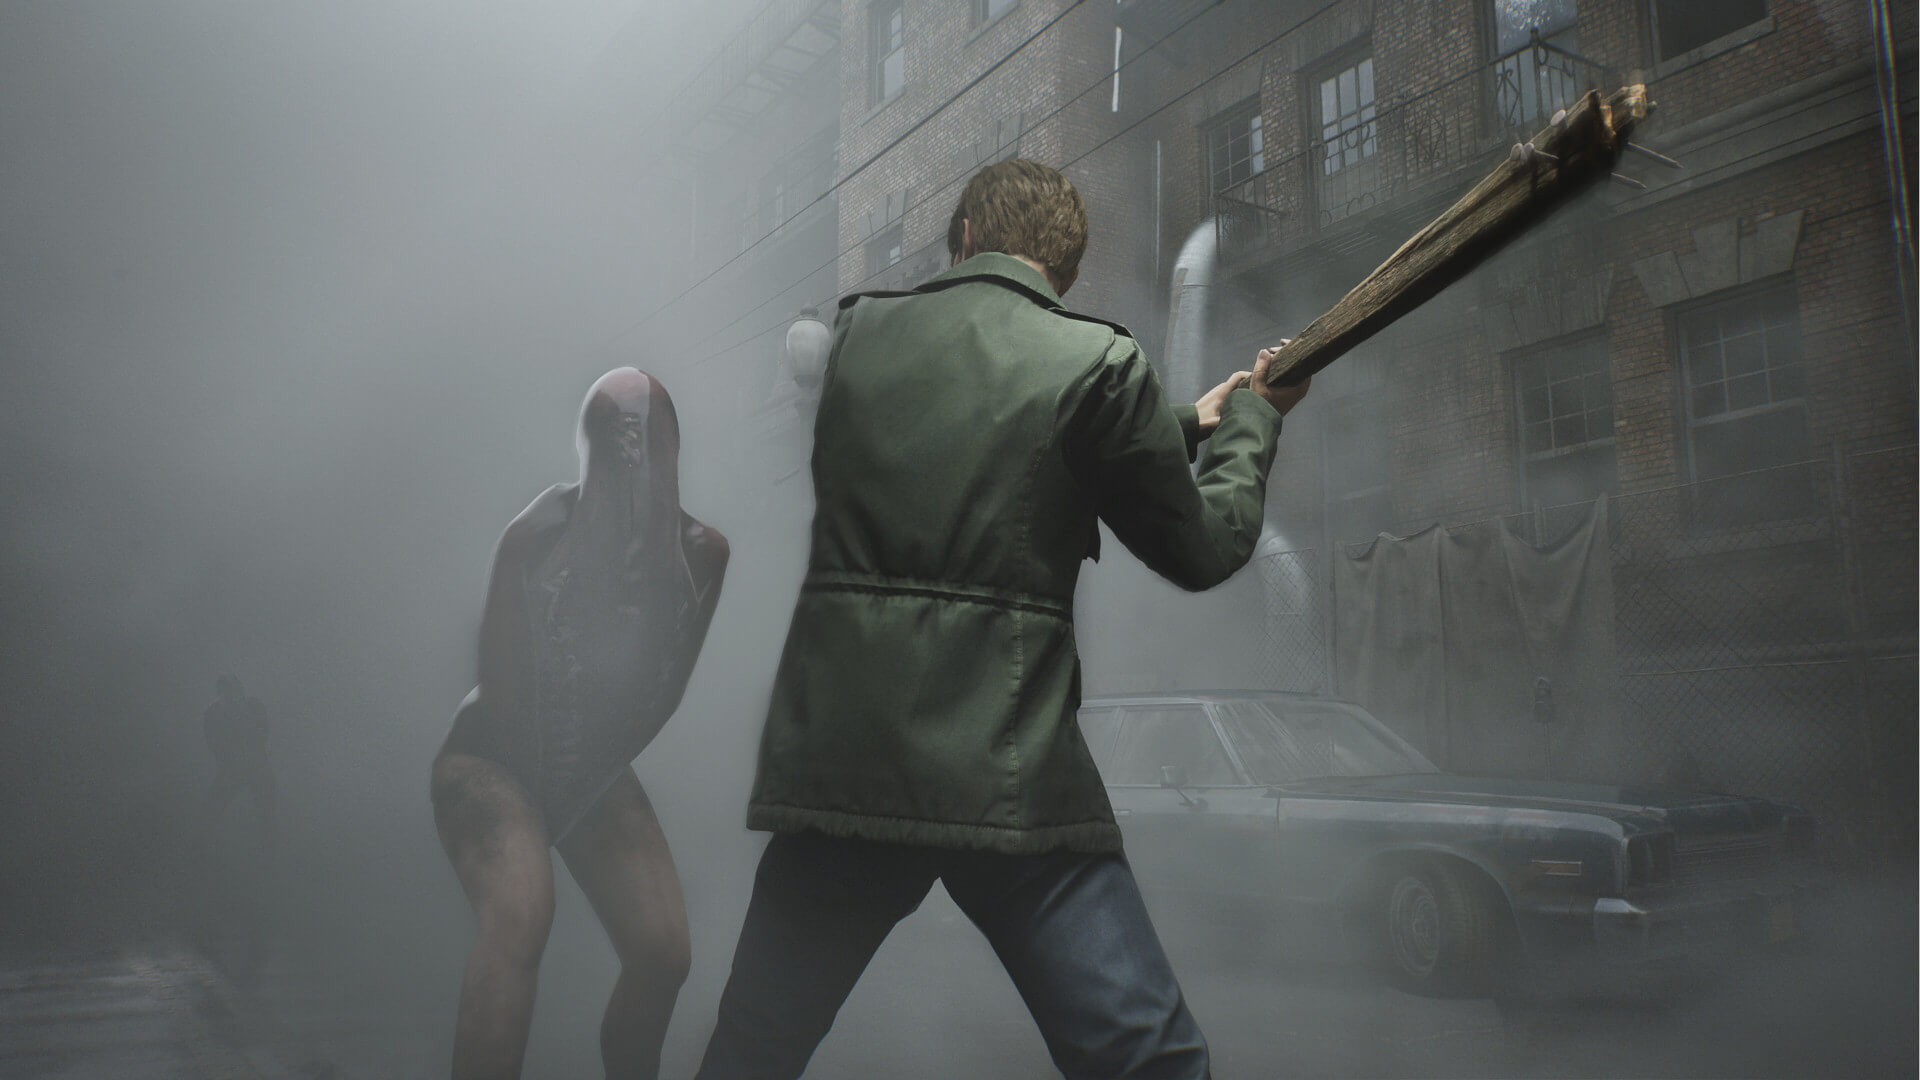 James swinging at an enemy with a melee weapon in the upcoming Silent Hill 2 remake